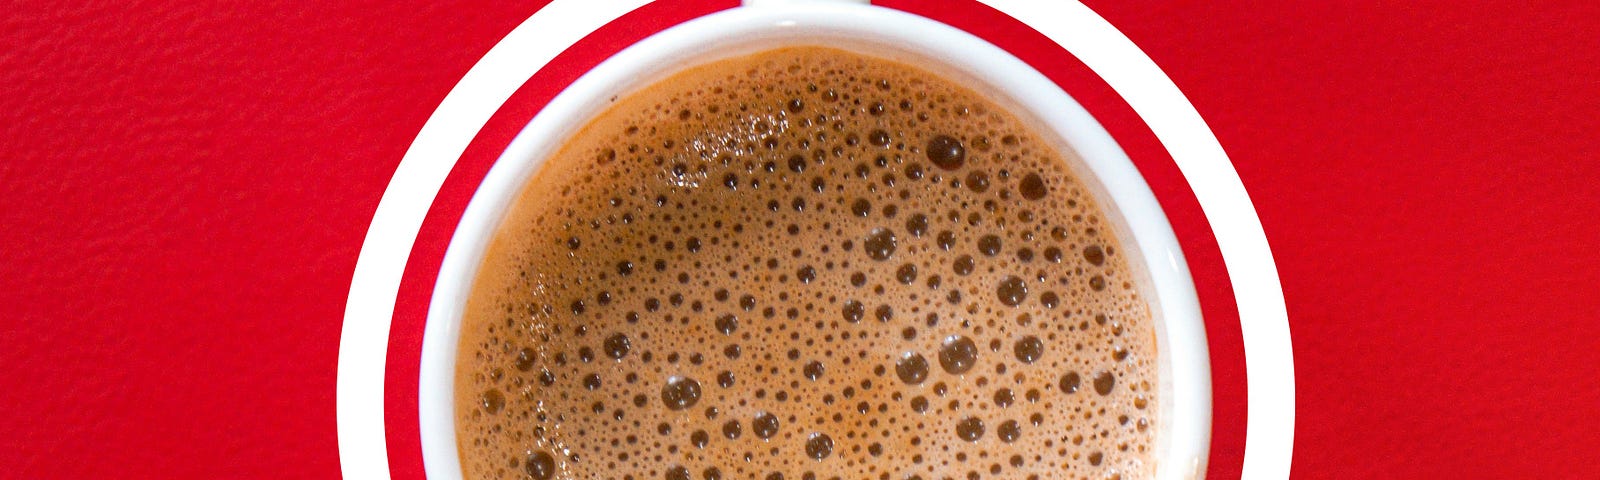 A bird’s eye view of a white coffee cup of frothy coffee on a red background.